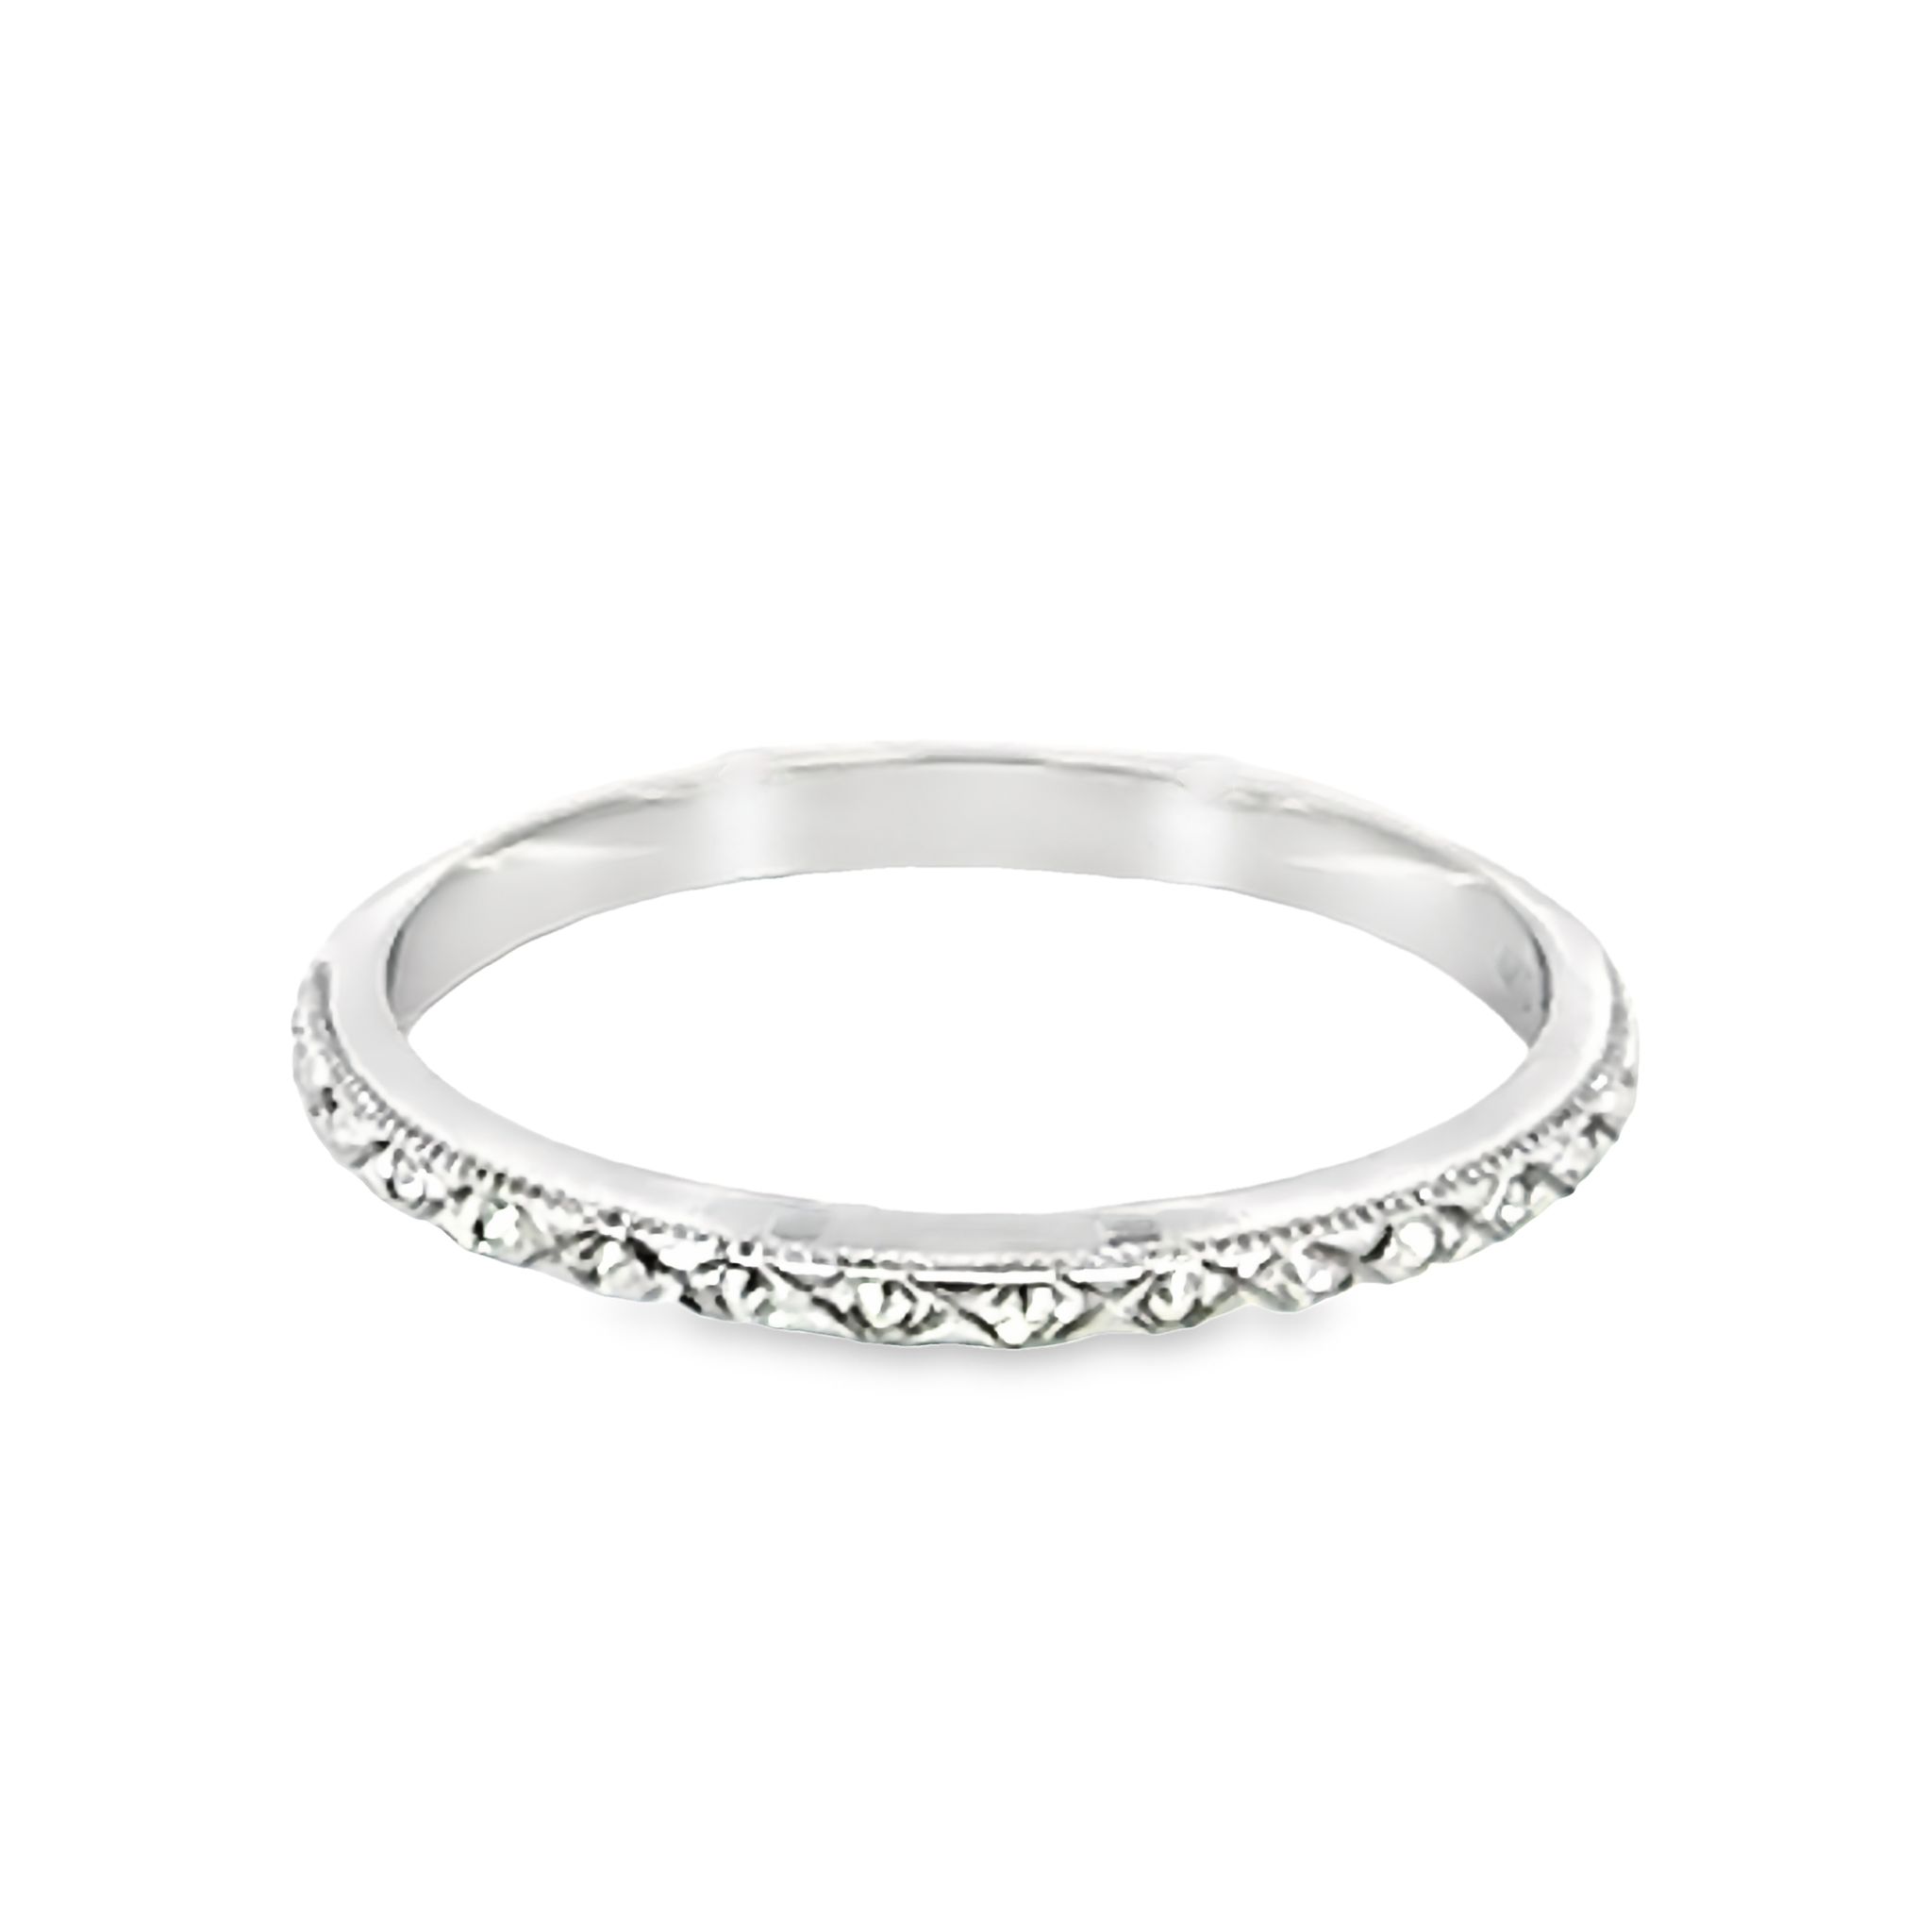 14k White Gold Etched Wedding Band